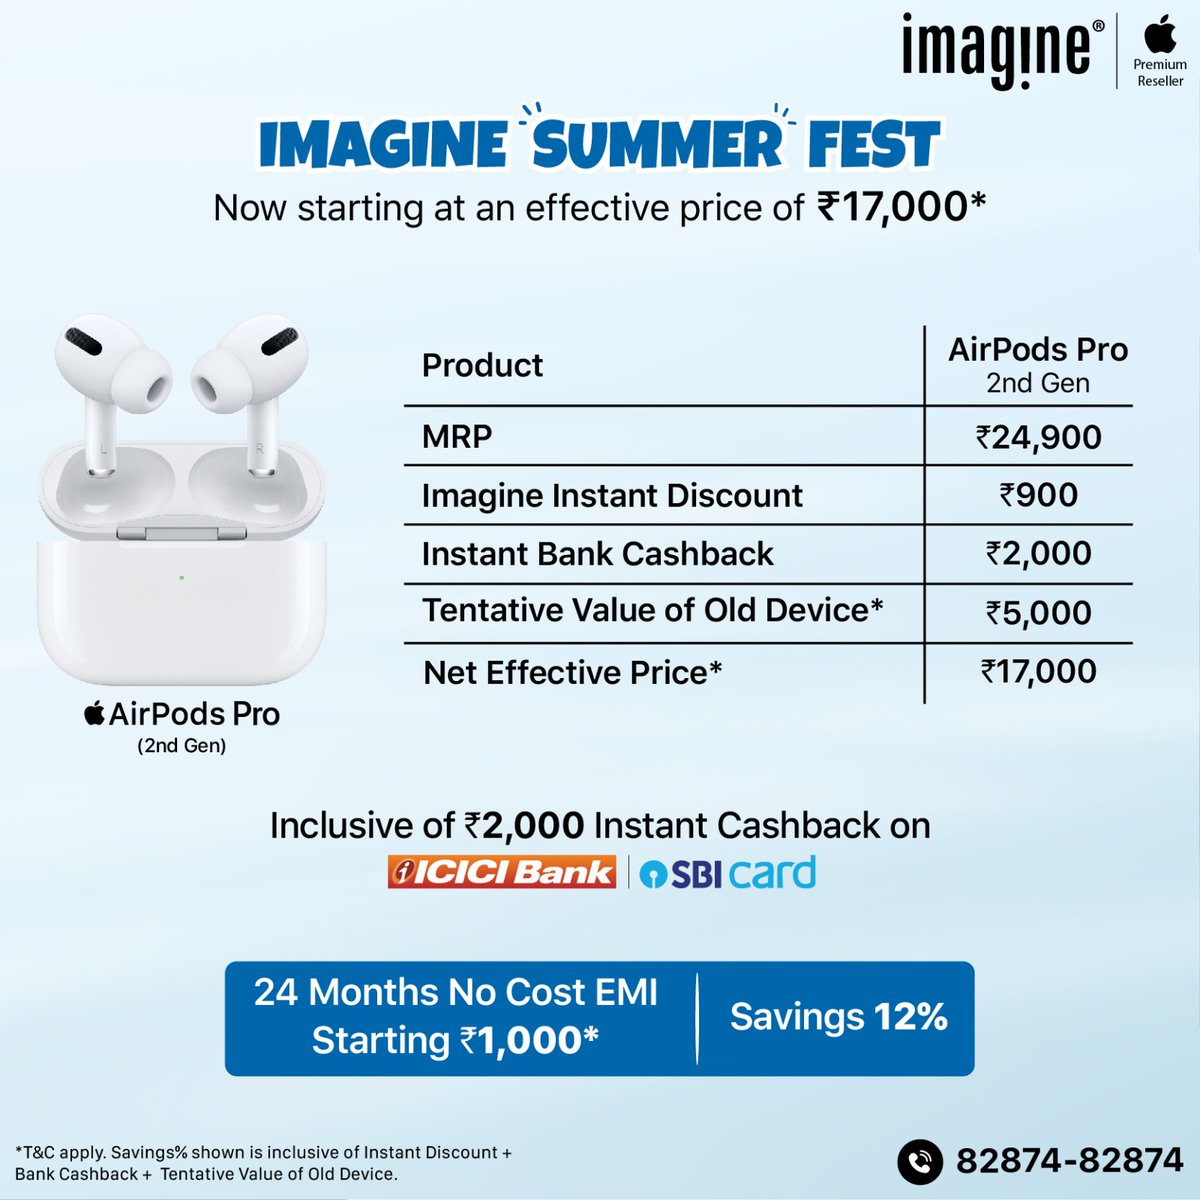 Celebrate Summer at Imagine: Exclusive Apple Deals Await! 🌞 AirPods starting at an effective price of ₹8,000* ✅ Upto ₹2,000* Instant Cashback on select banks ✅ Upto ₹1,400* Instant In-store discount ✅ GST Invoice available ✅ Upto 24 Months No Cost EMI available at store